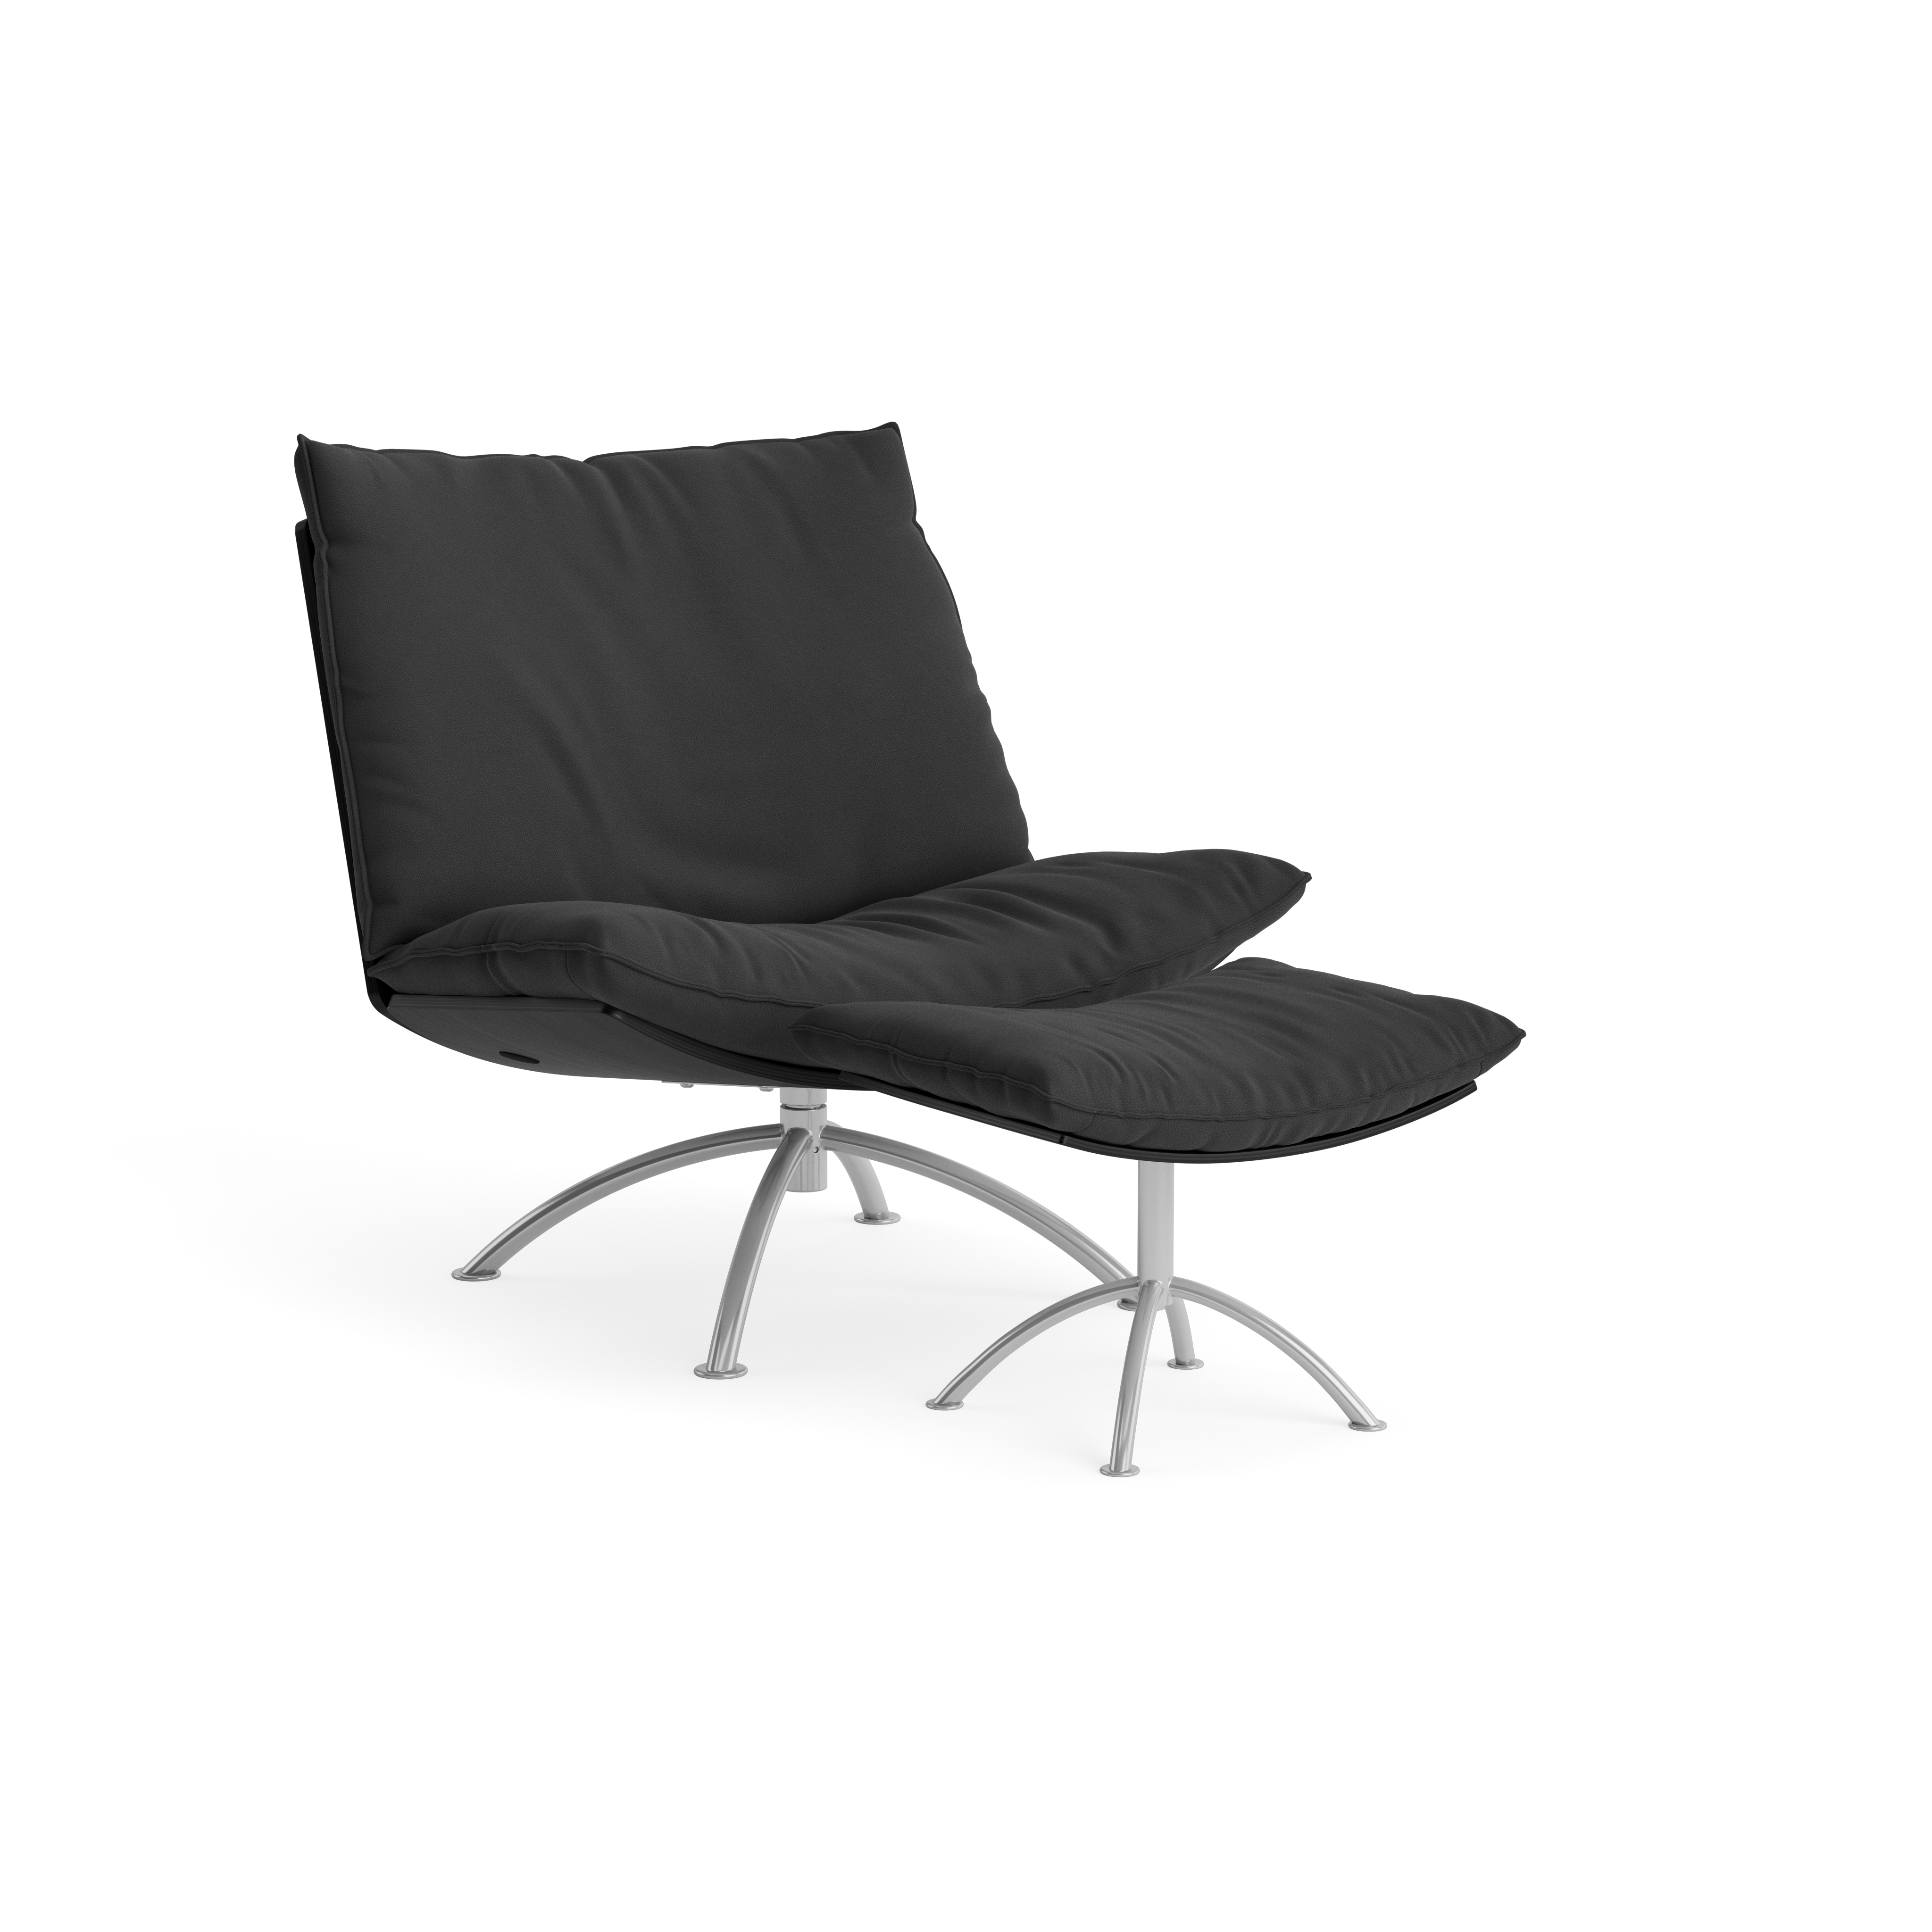 PRIMETIME - Armchair with stool, Brushed steel